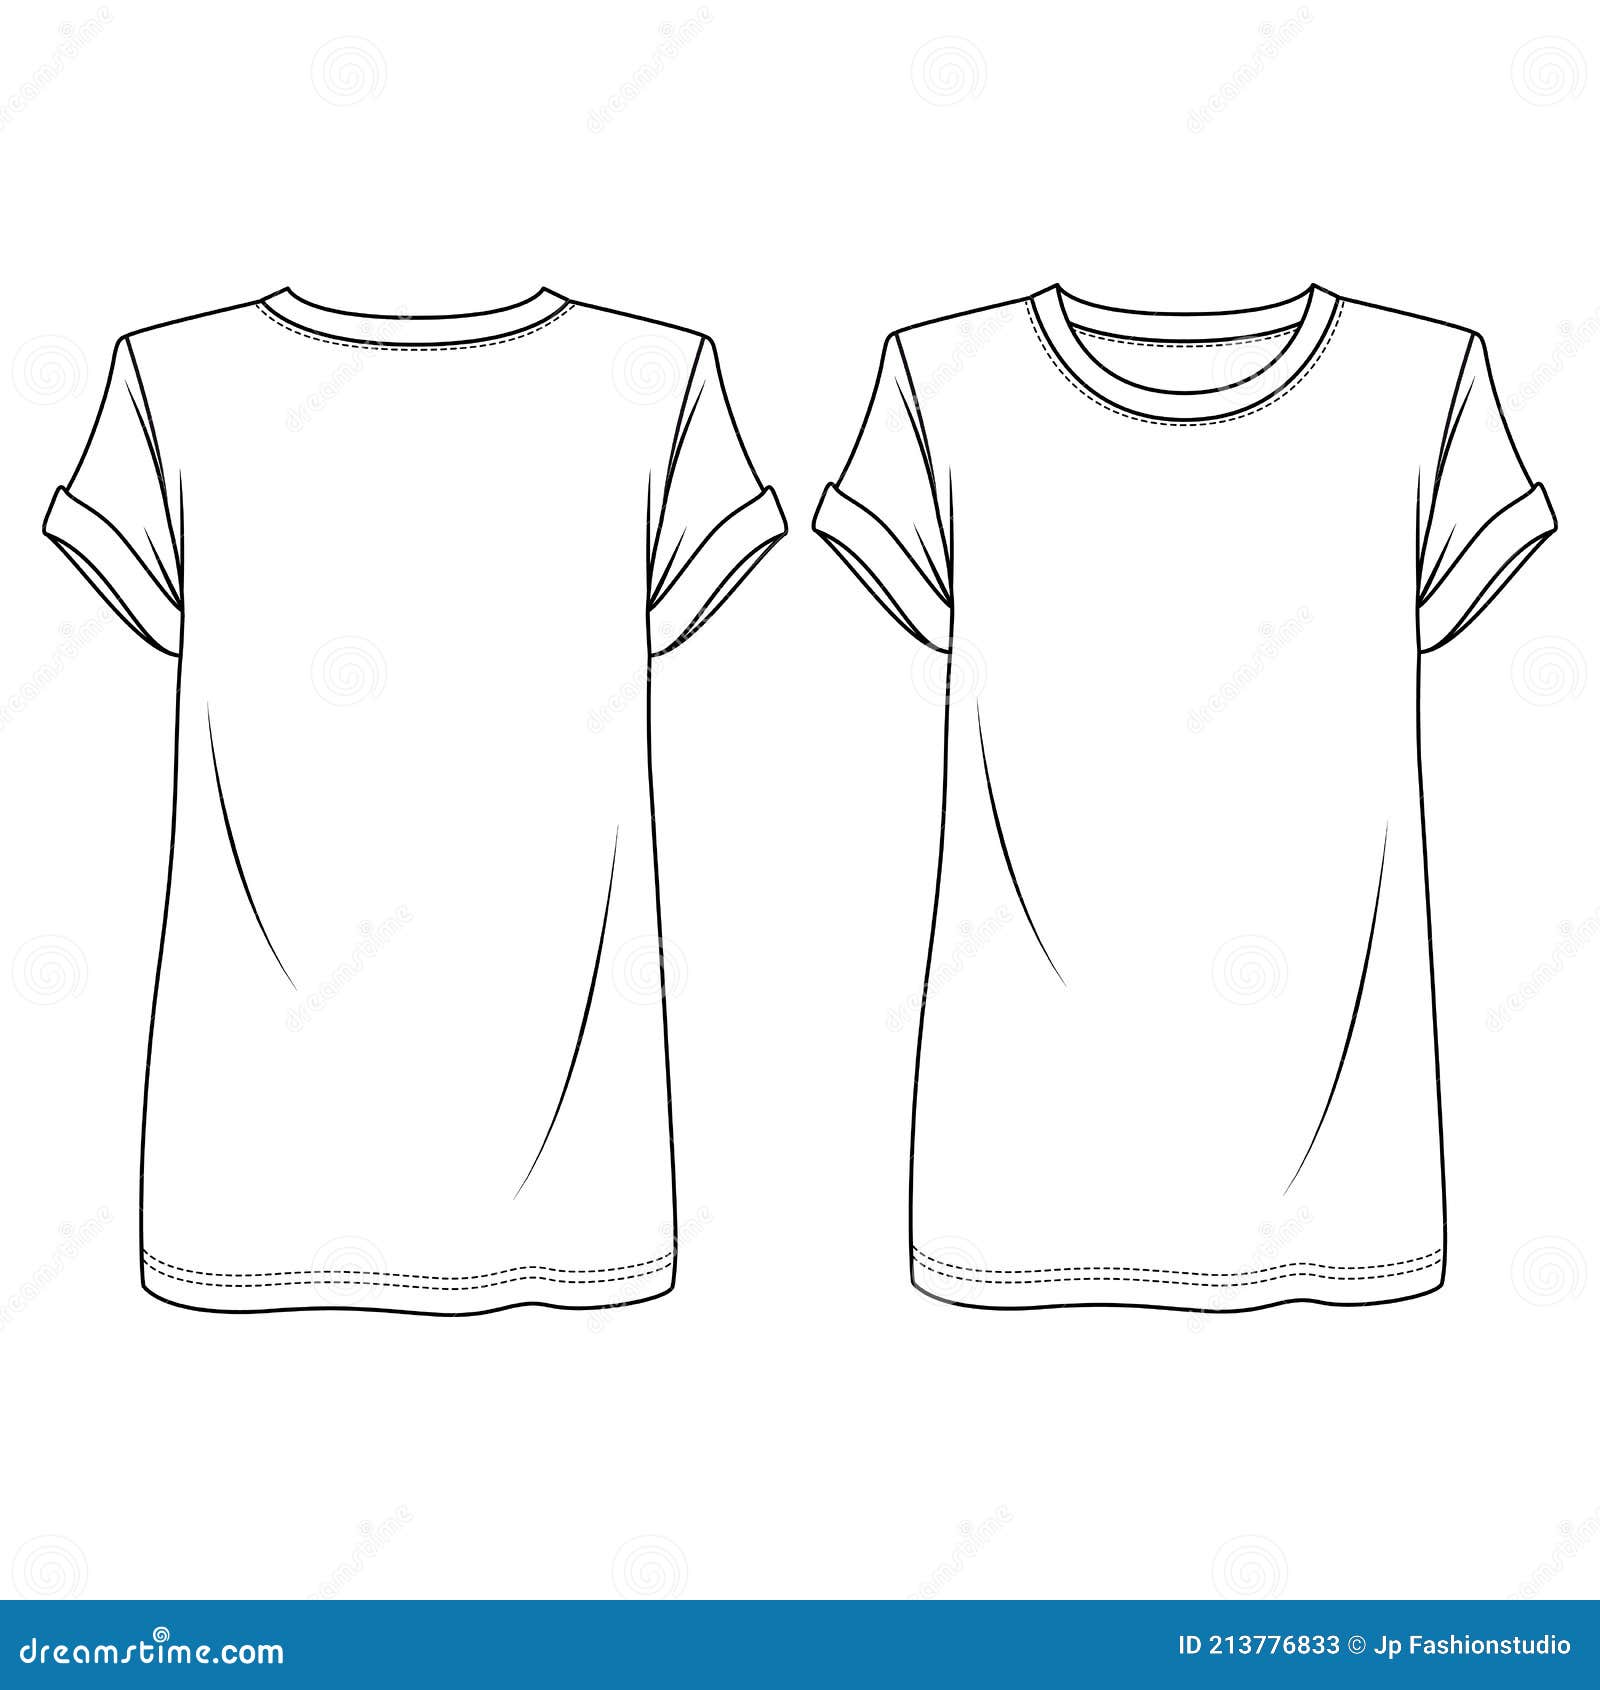 Buy Women's Loose Fit V Neck T-shirt Vector Sketch, Women's Loose Fit T-shirt  Flat Sketch Set, T-shirt Vector Sketch, T-shirt CAD Sketch Online in India  - Etsy